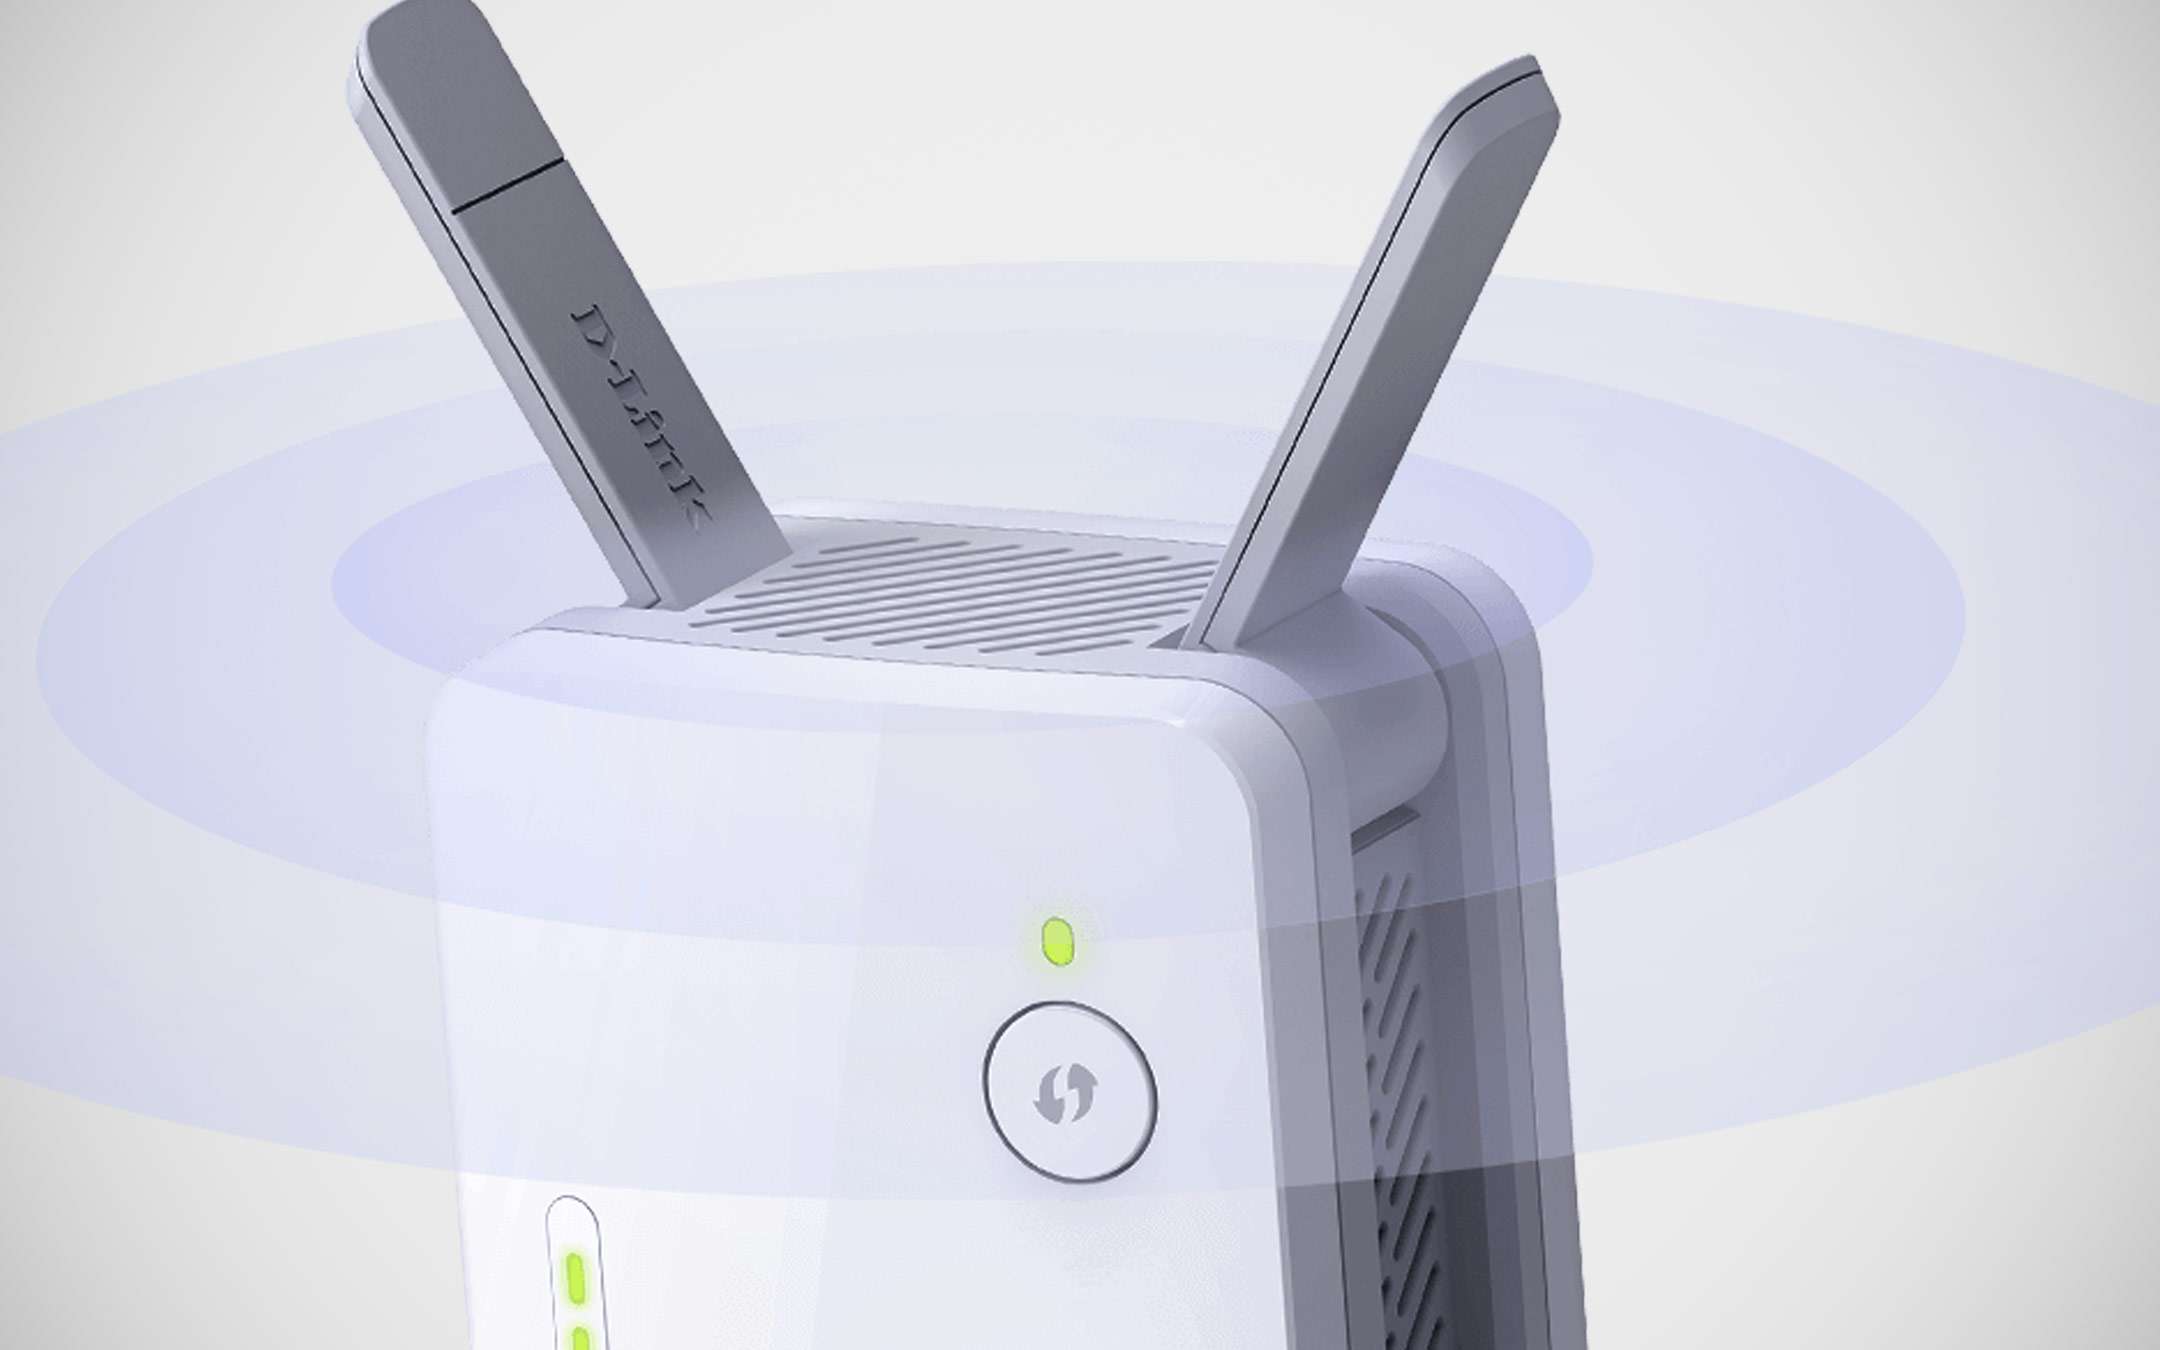 The D-Link WiFi repeater on offer at -24%